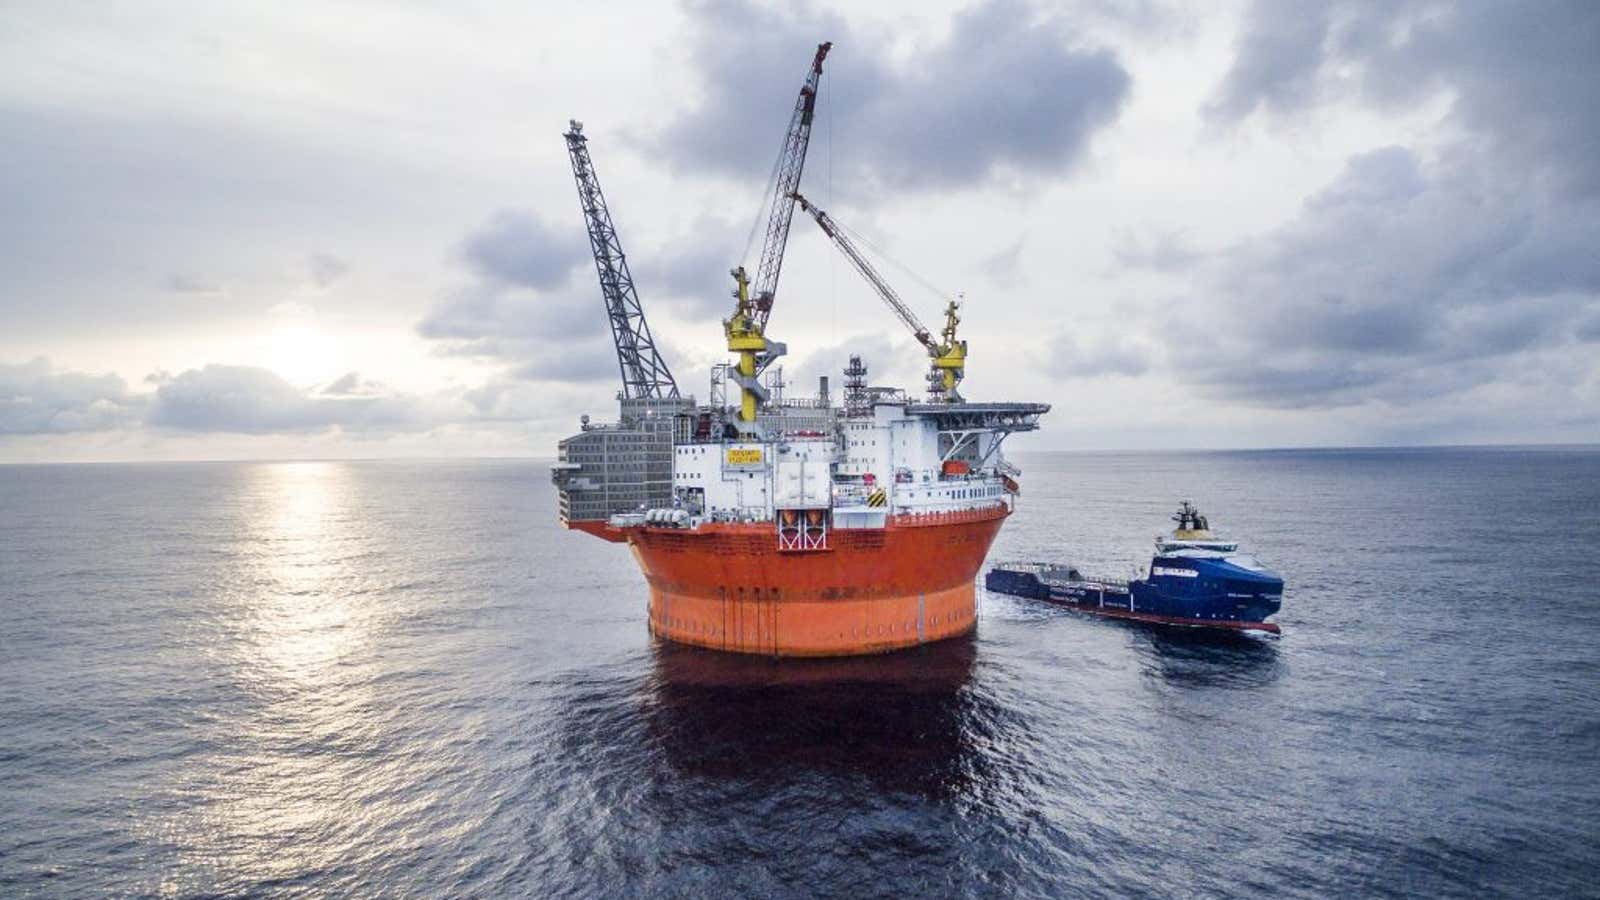 The Goliat oil rig, owned by Vår Energi and Equinor, operating in the Norway-owned section of the Barents Sea.